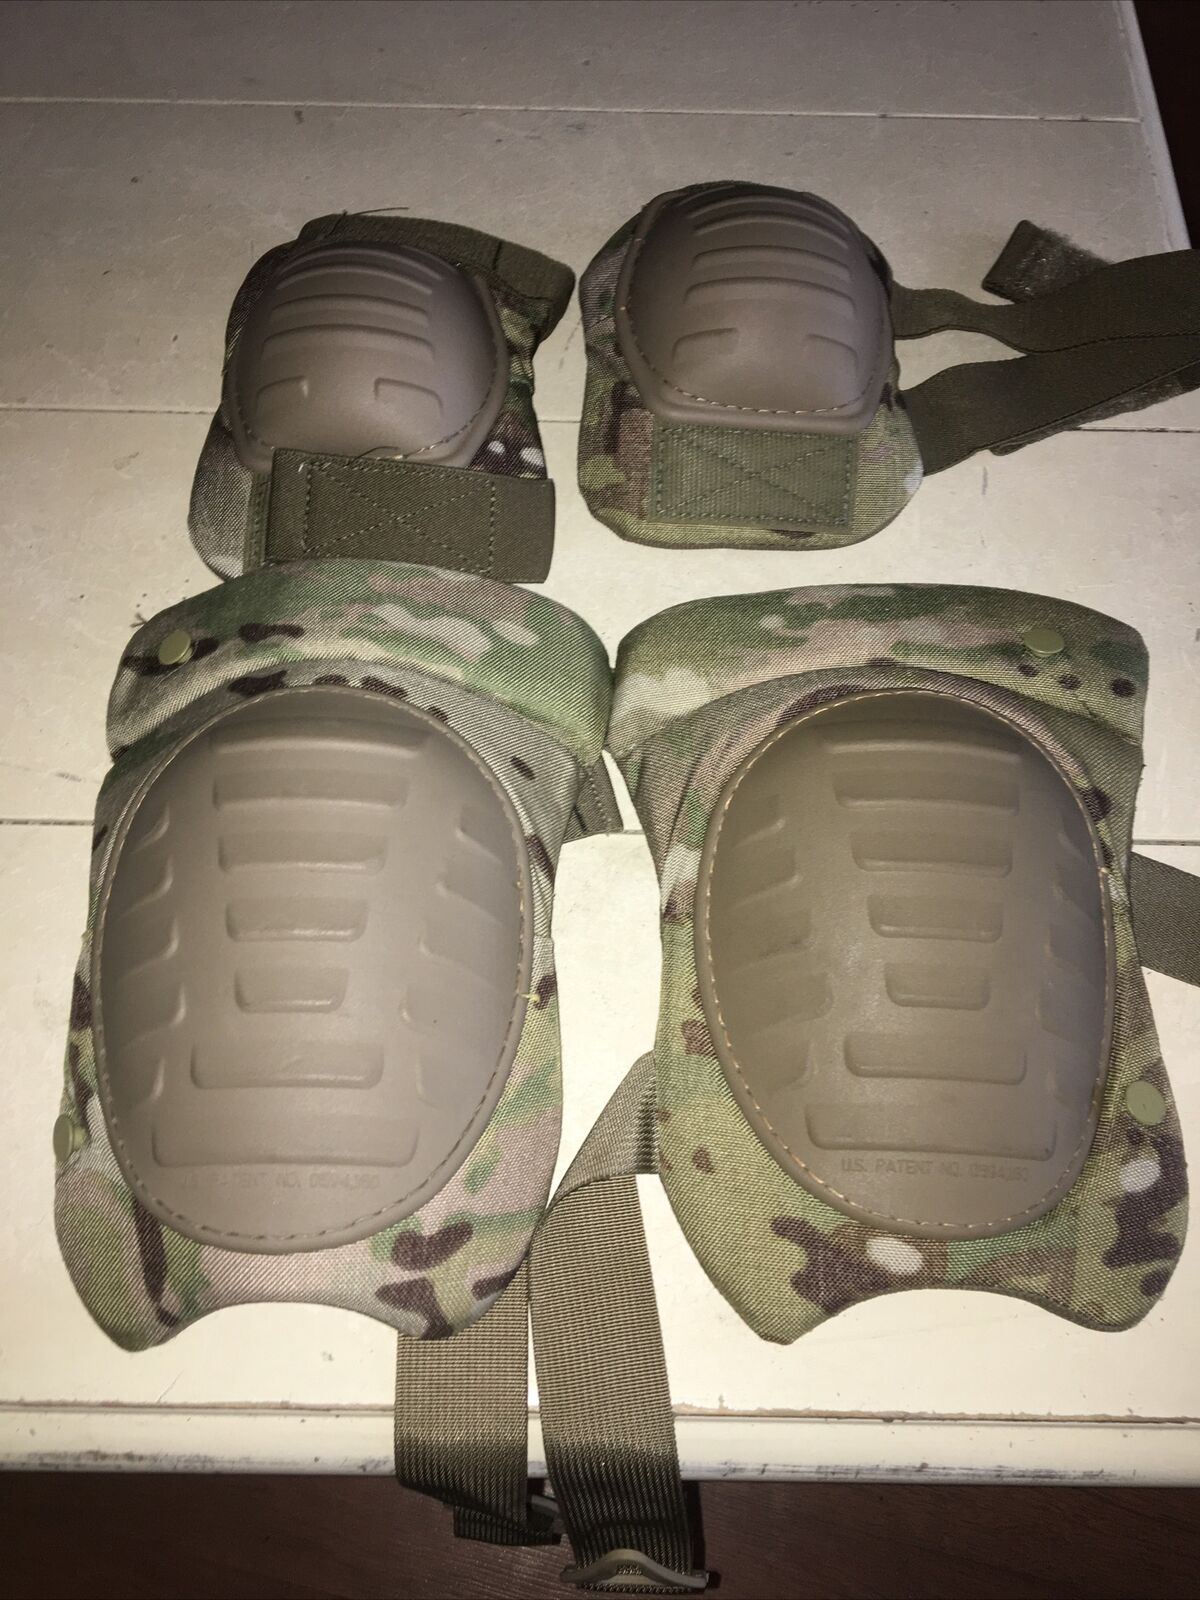 U.S. Military Knee and Elbow Pad System OCP Multicam Offical Issue -Excellent